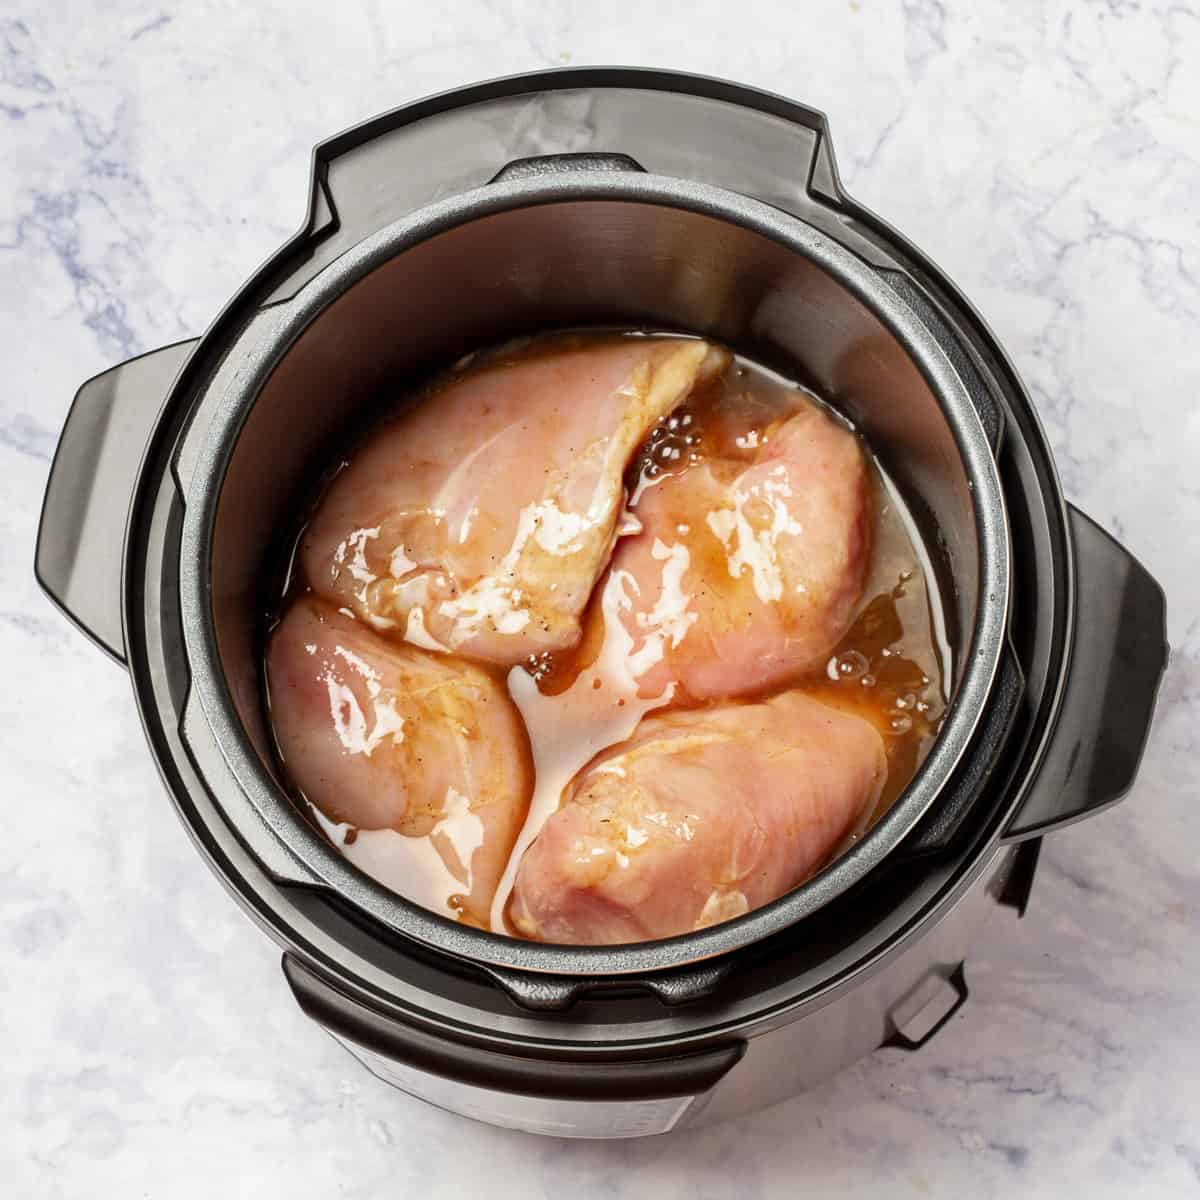 Marinated chicken breasts directly in Instant Pot